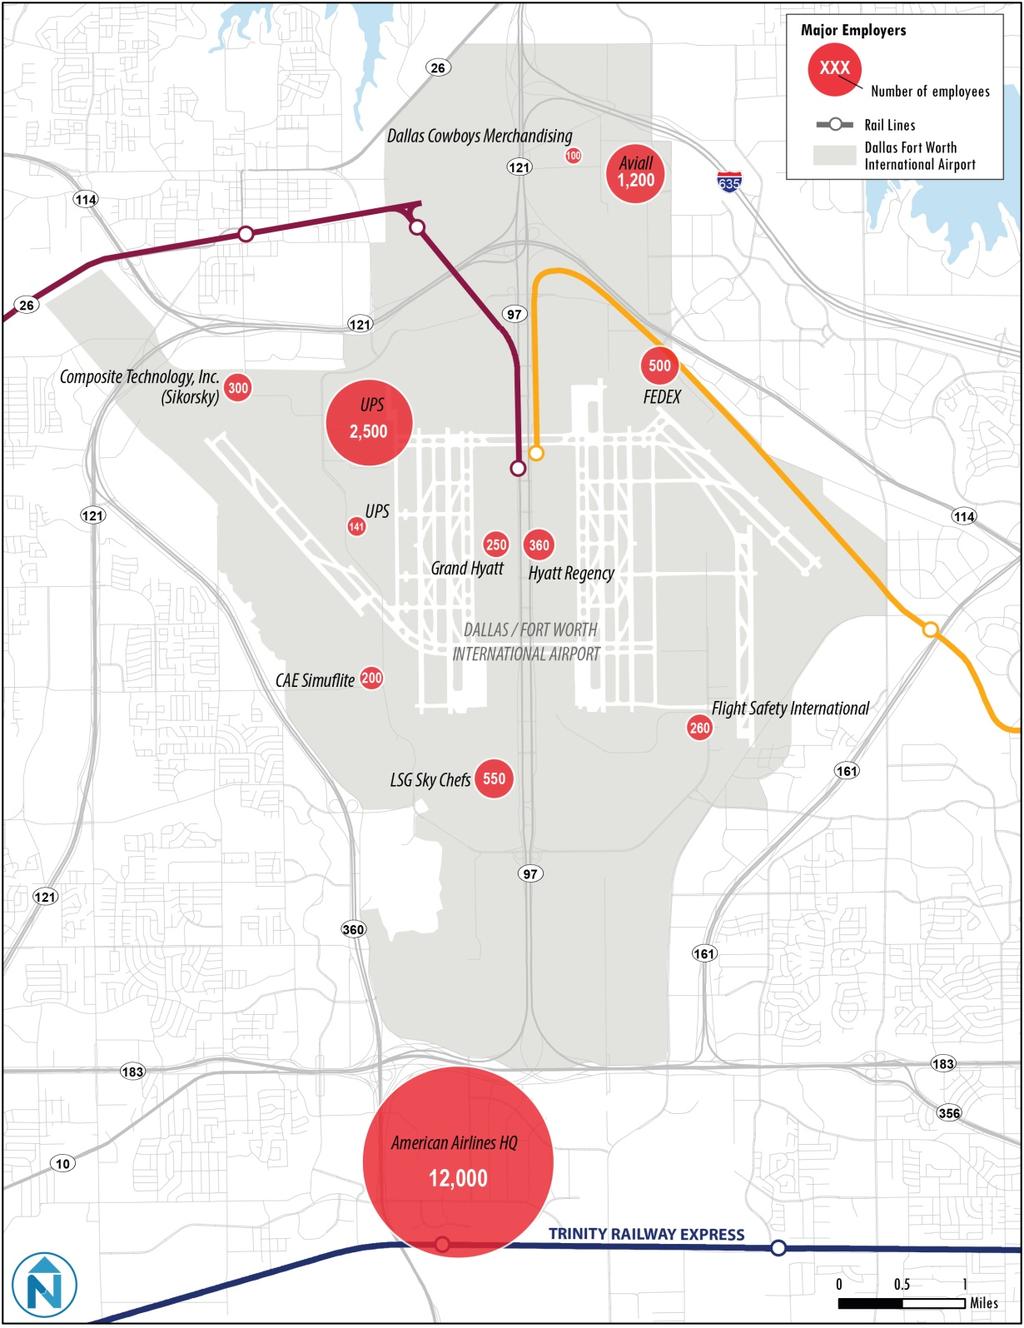 Figure 55 Locations of Major Employers in the DFW Airport Vicinity Source: Data collected